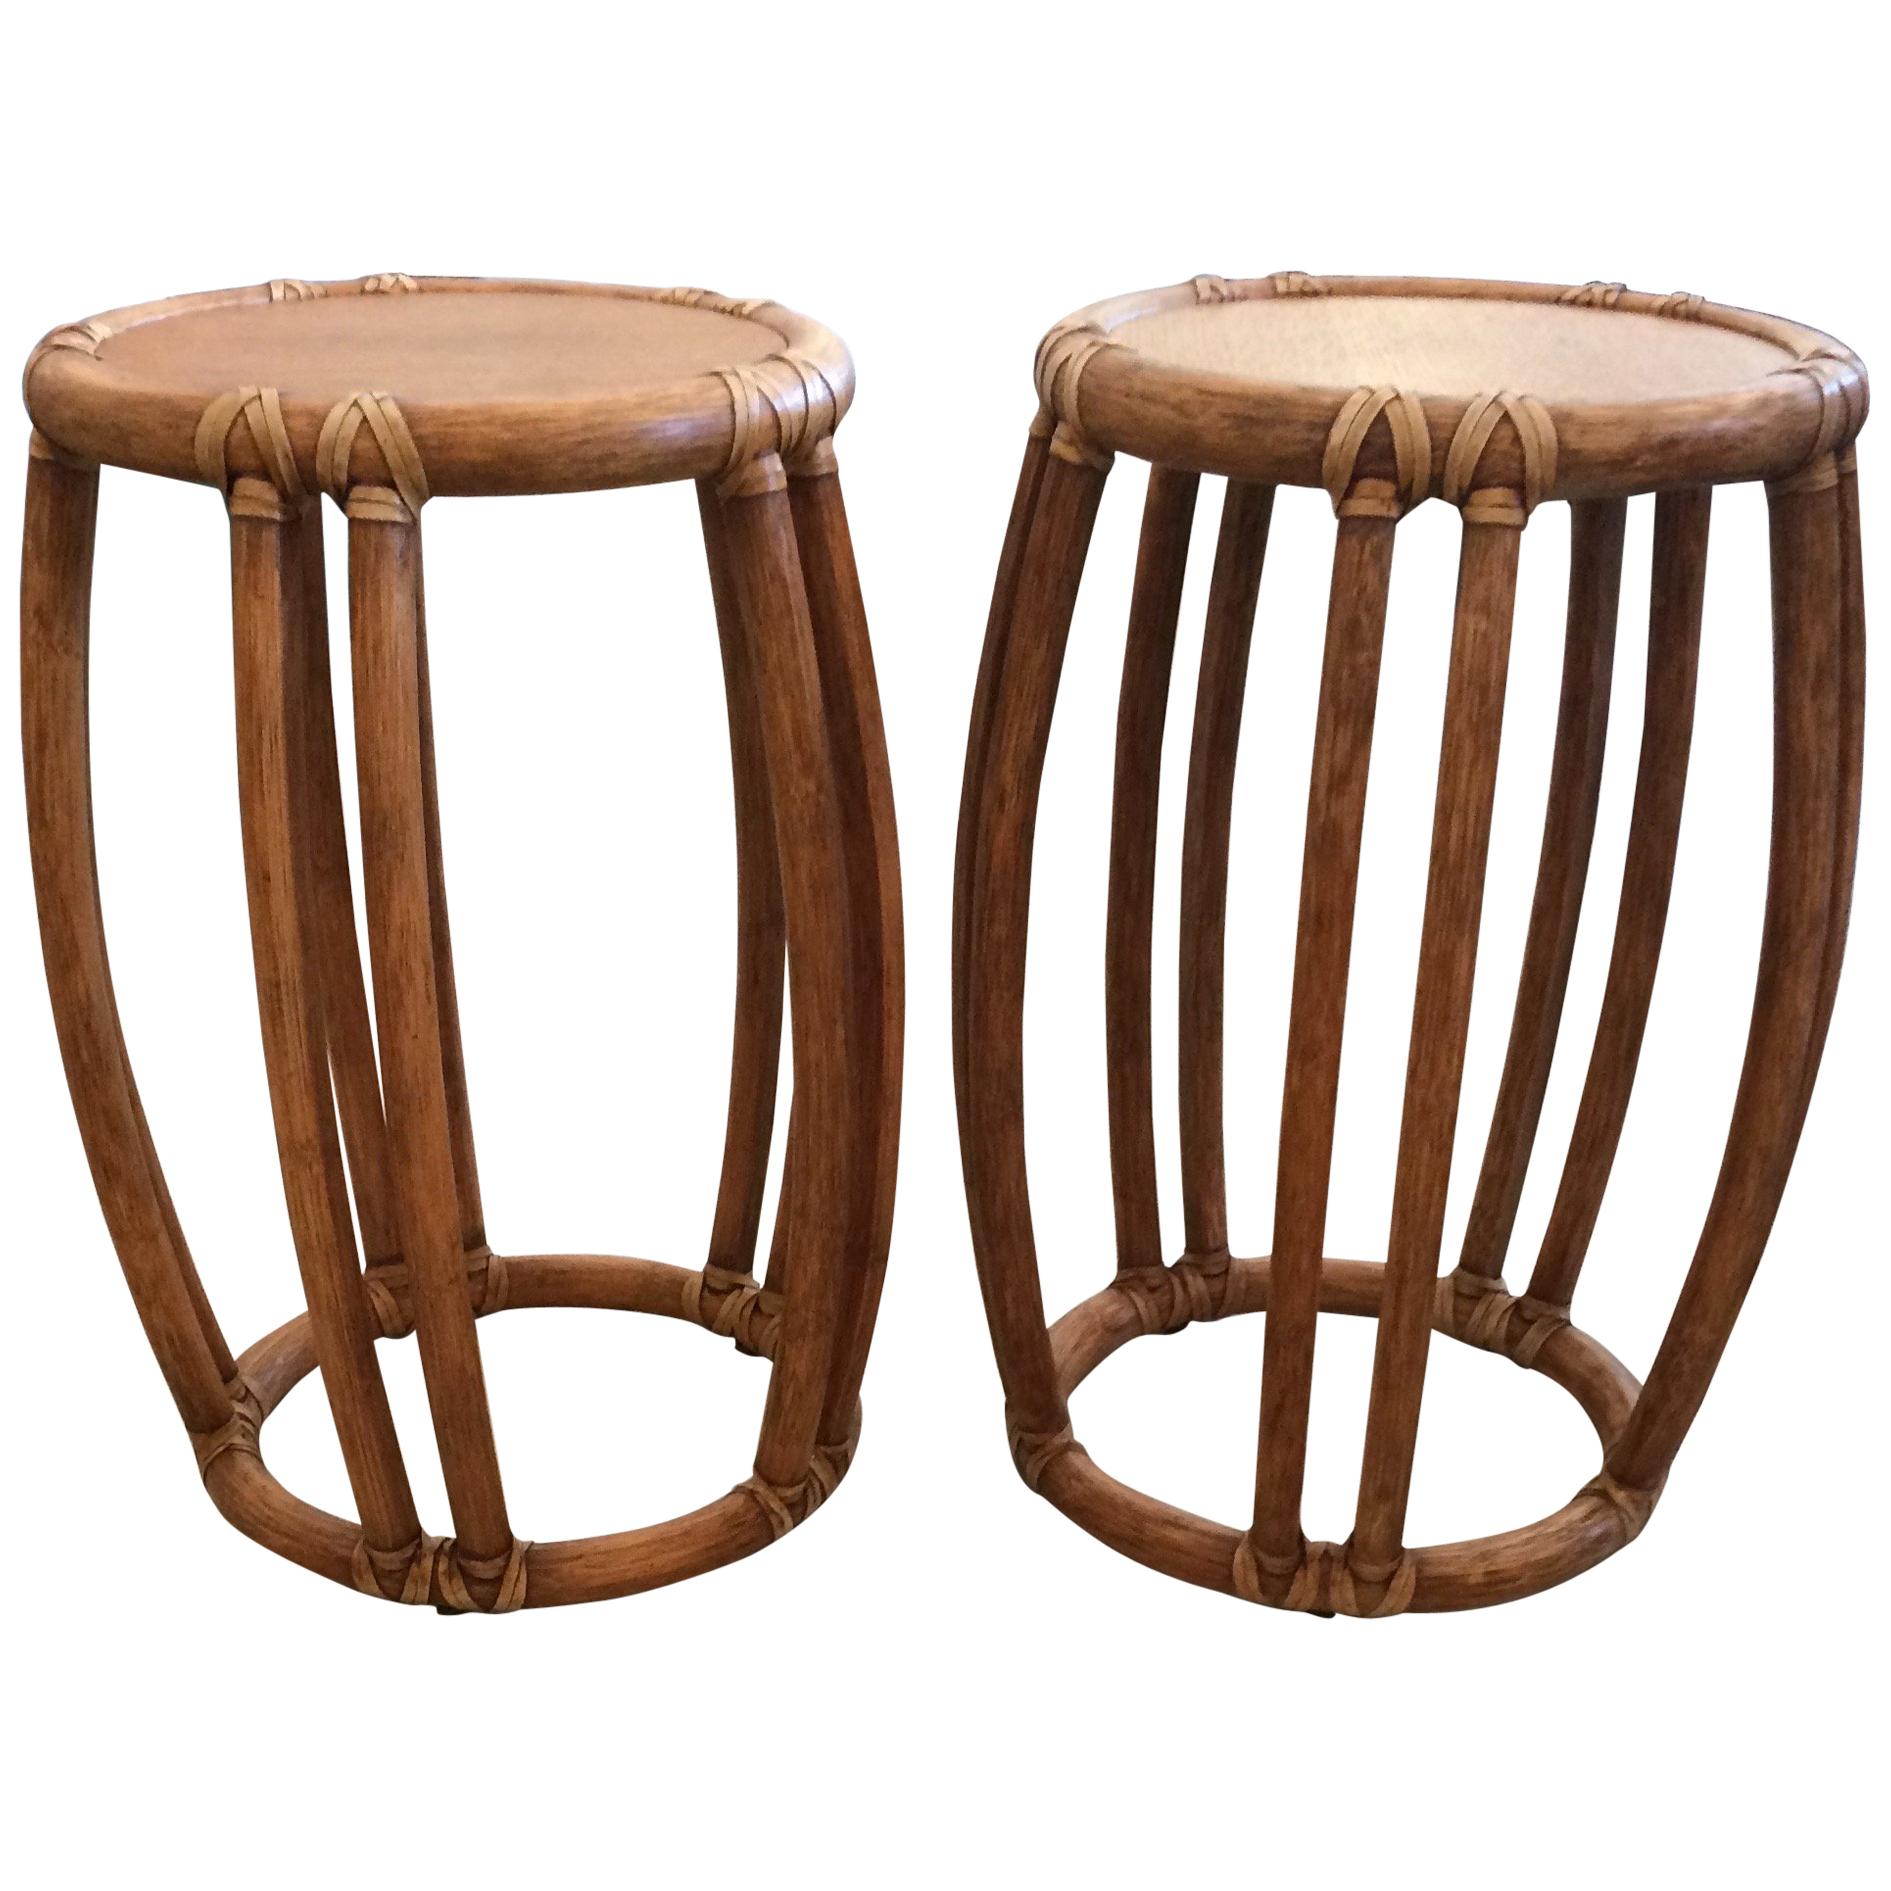 Pair of Round McGuire Wood and Rattan Trimmed Side Tables